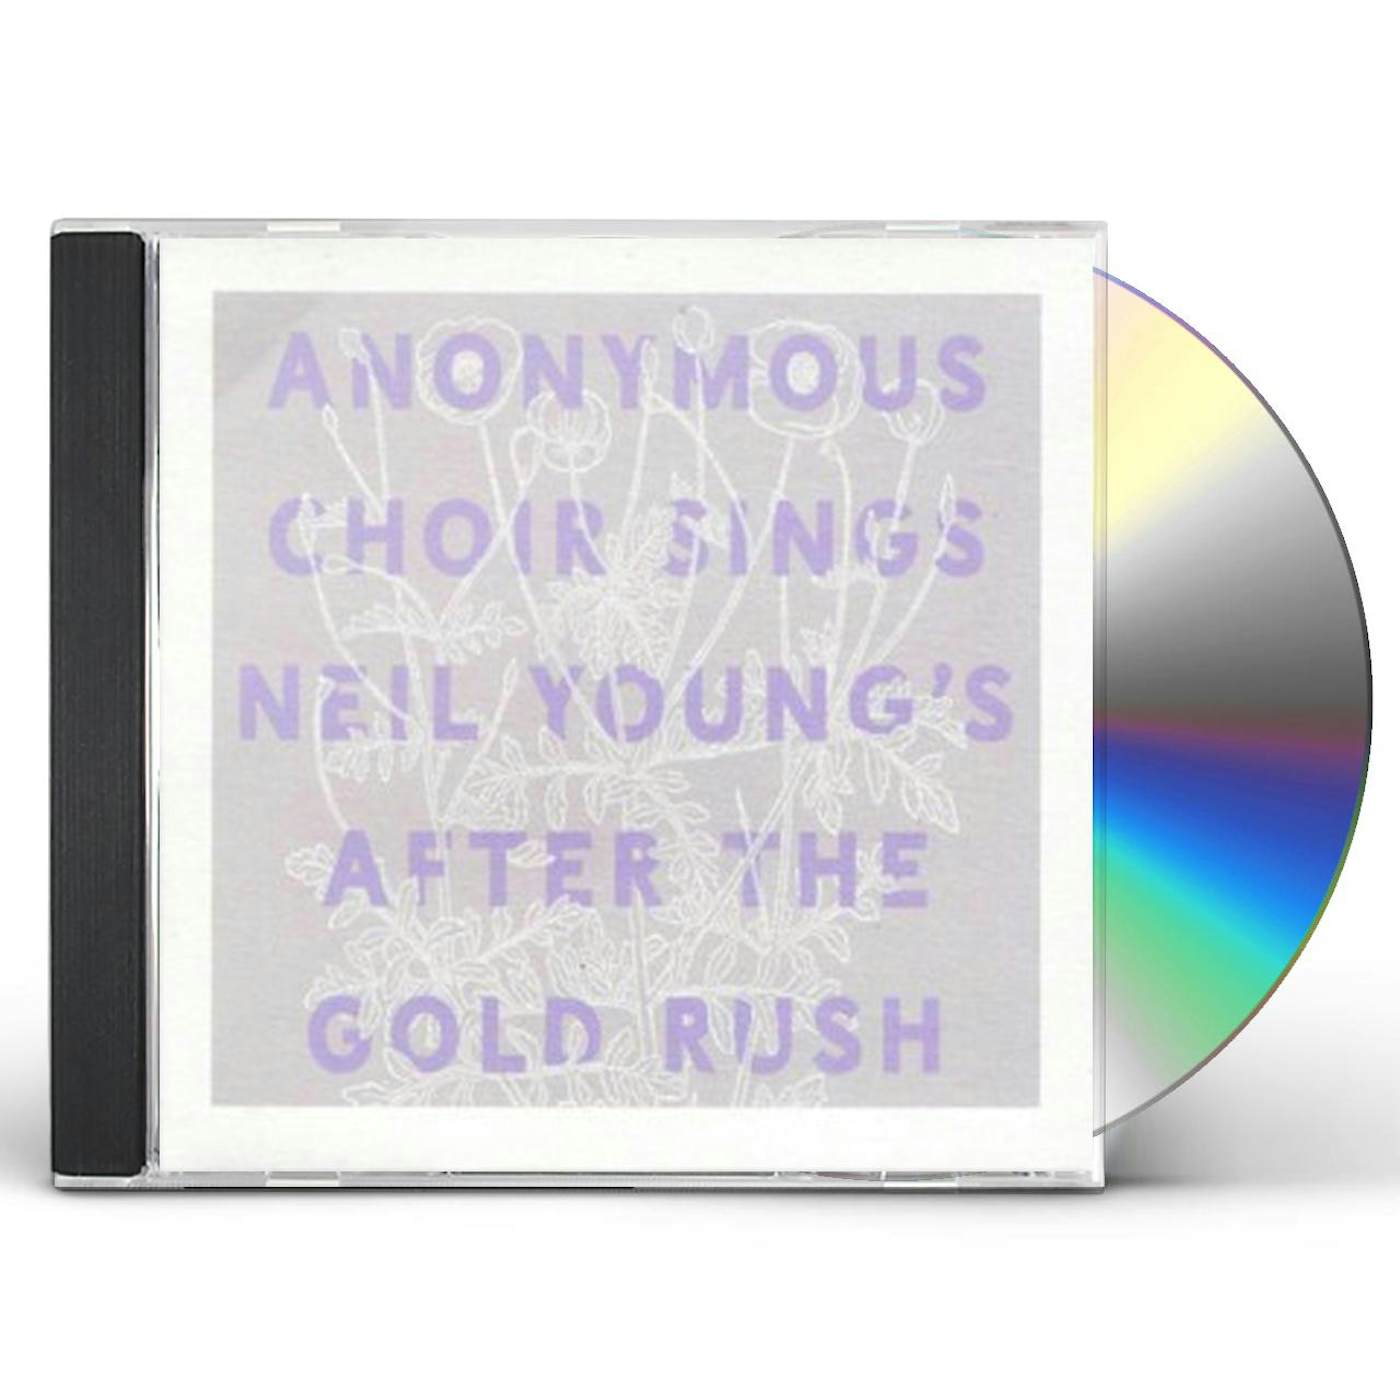 Anonymous Choir SINGS NEIL YOUNG'S AFTER THE GOLD RUSH CD